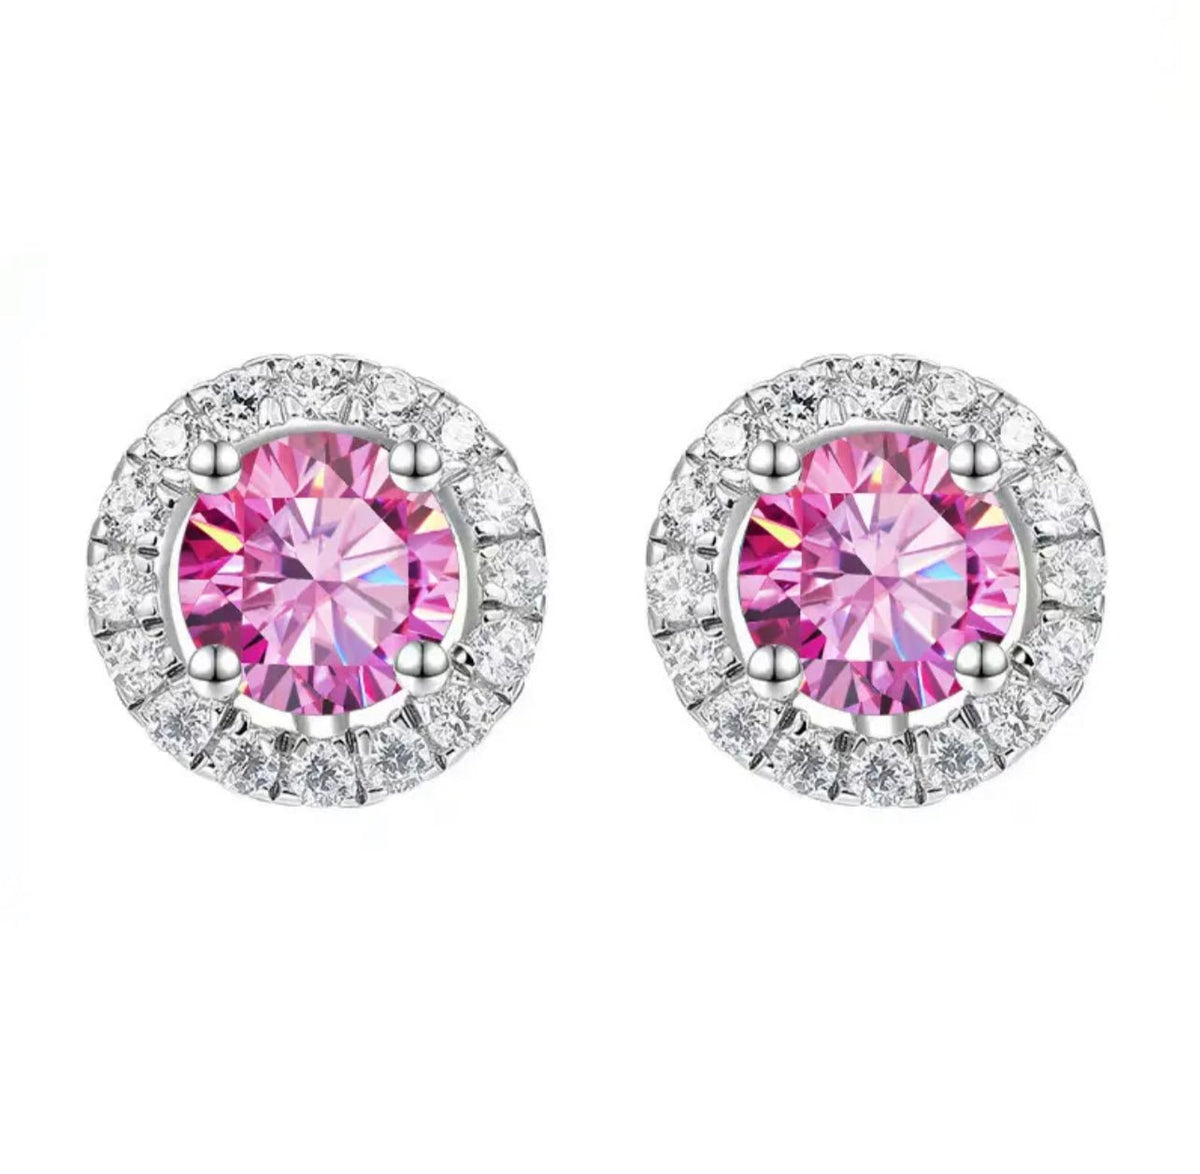 Pink Moissanite Halo Earrings - The Real Jewelry CompanyThe Real Jewelry Company